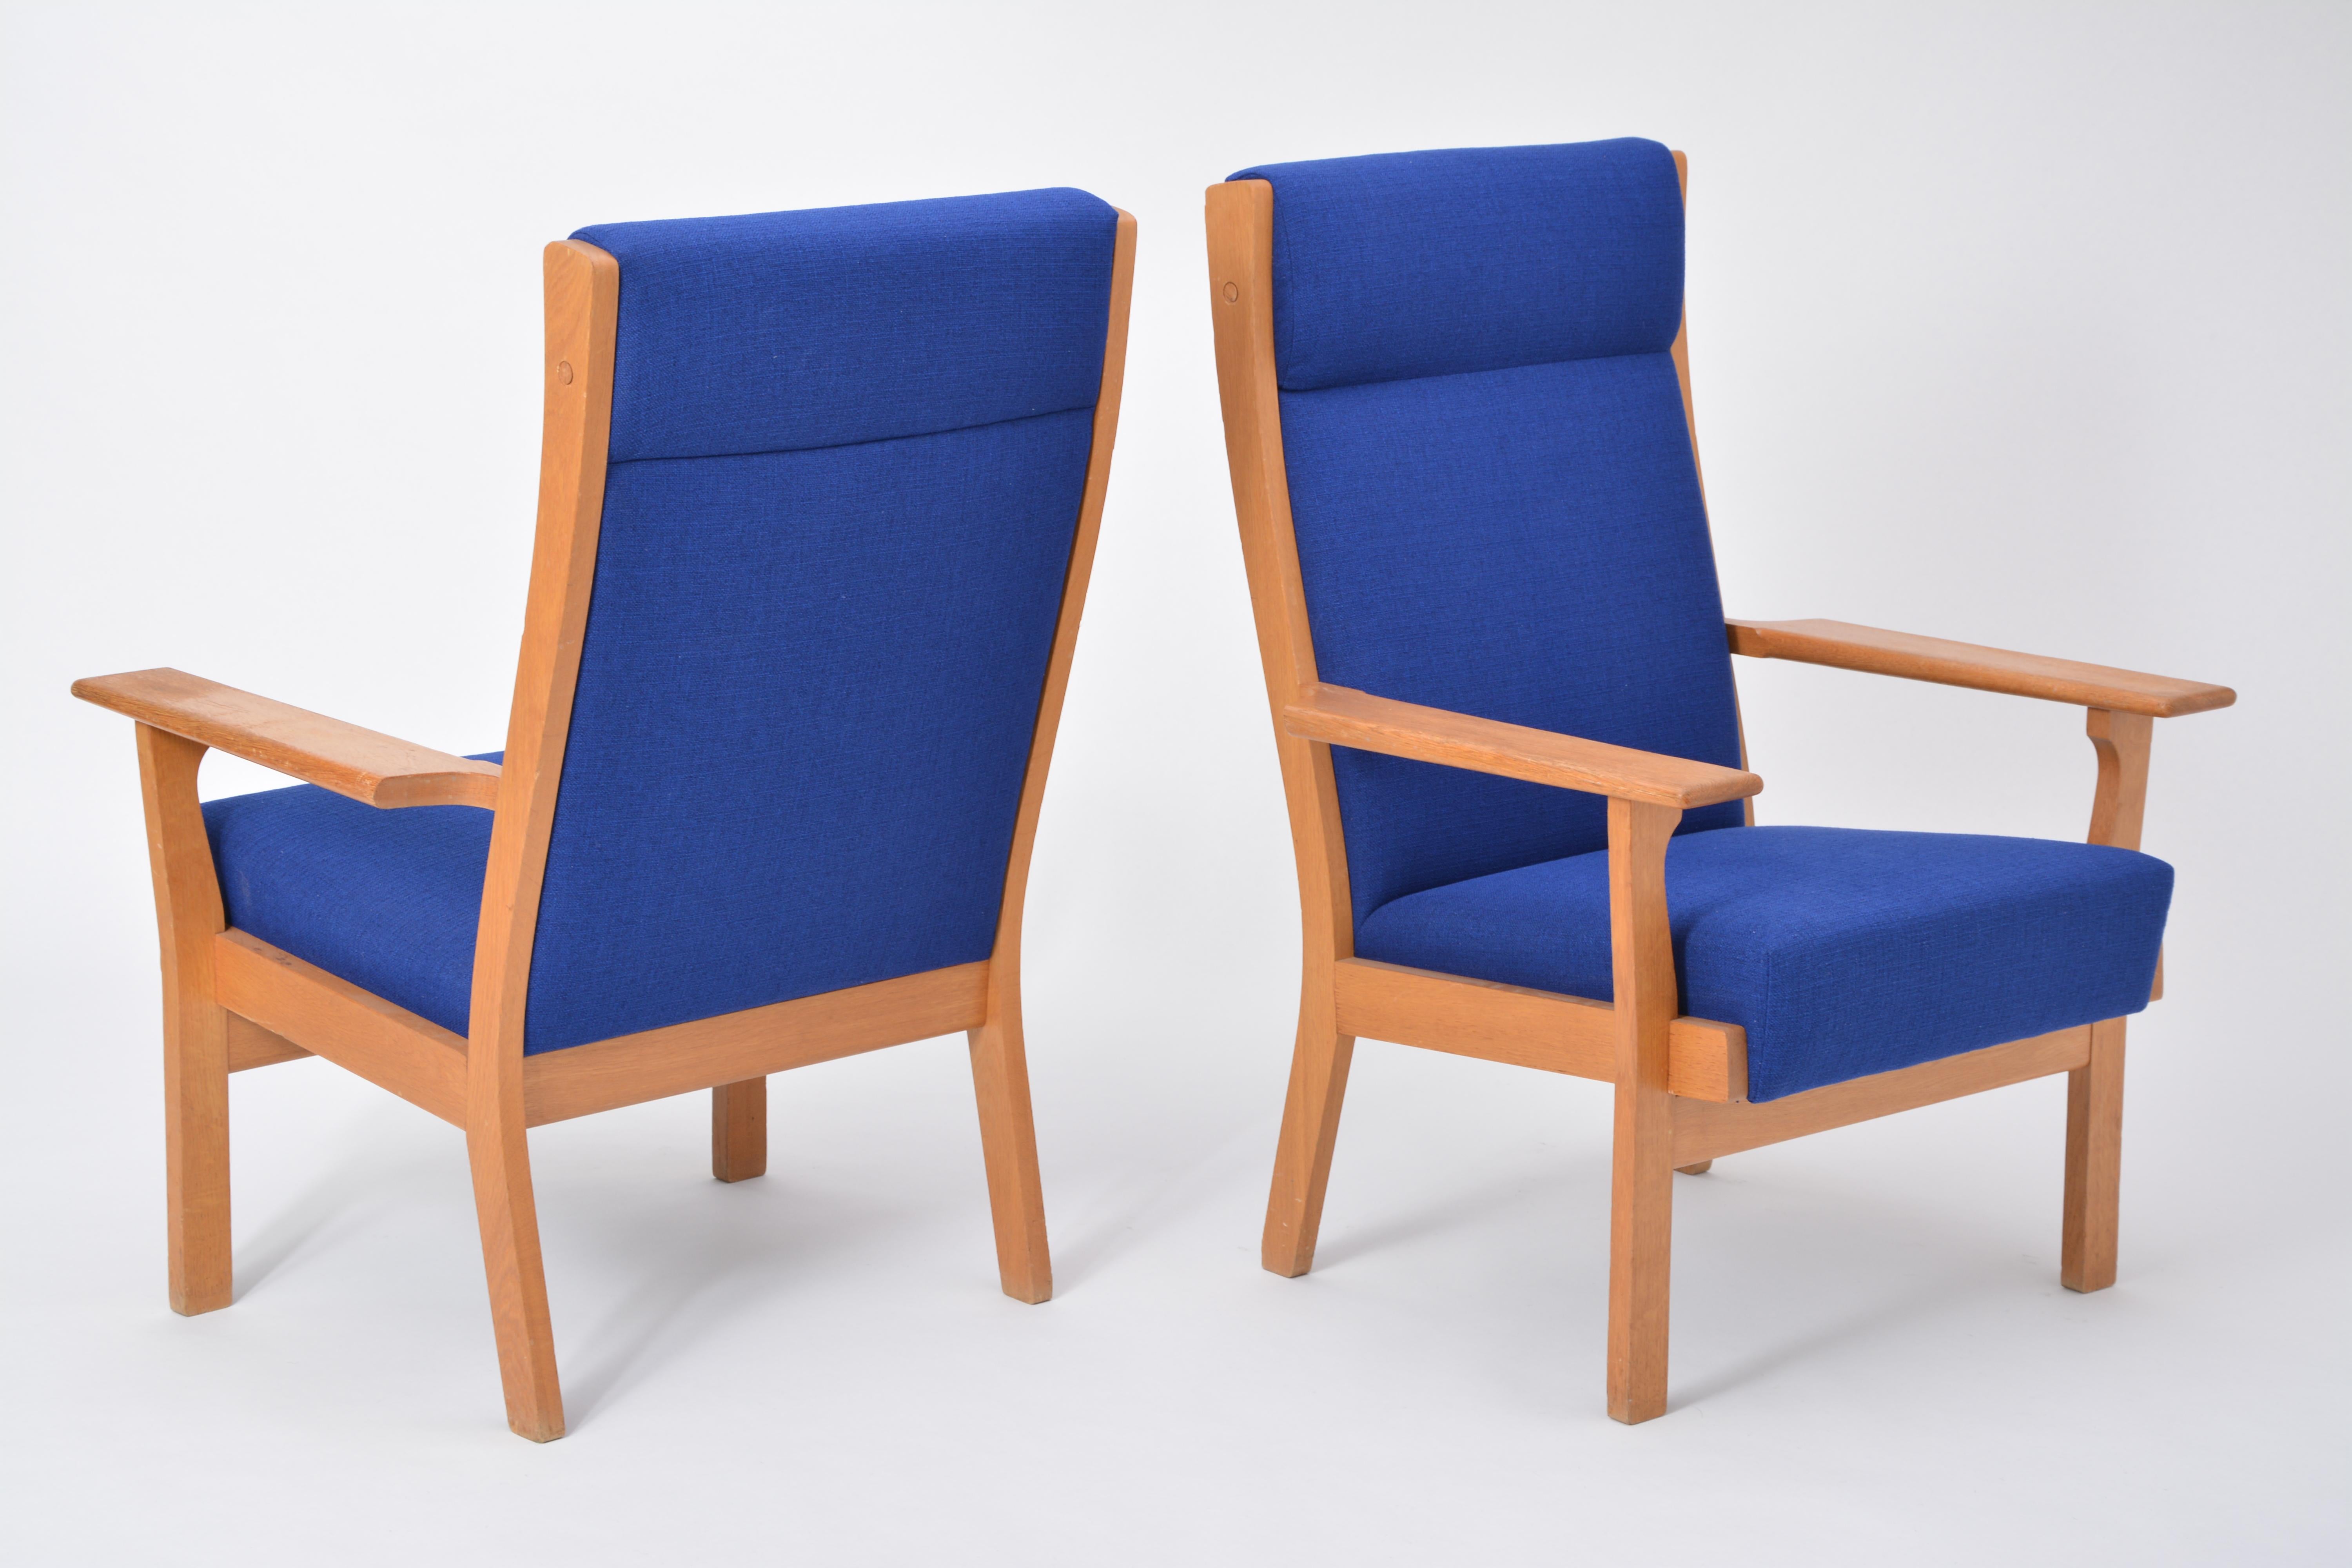 Set of Two Danish Mid-Century Modern GE 181 A chairs by Hans Wegner for GETAMA 1